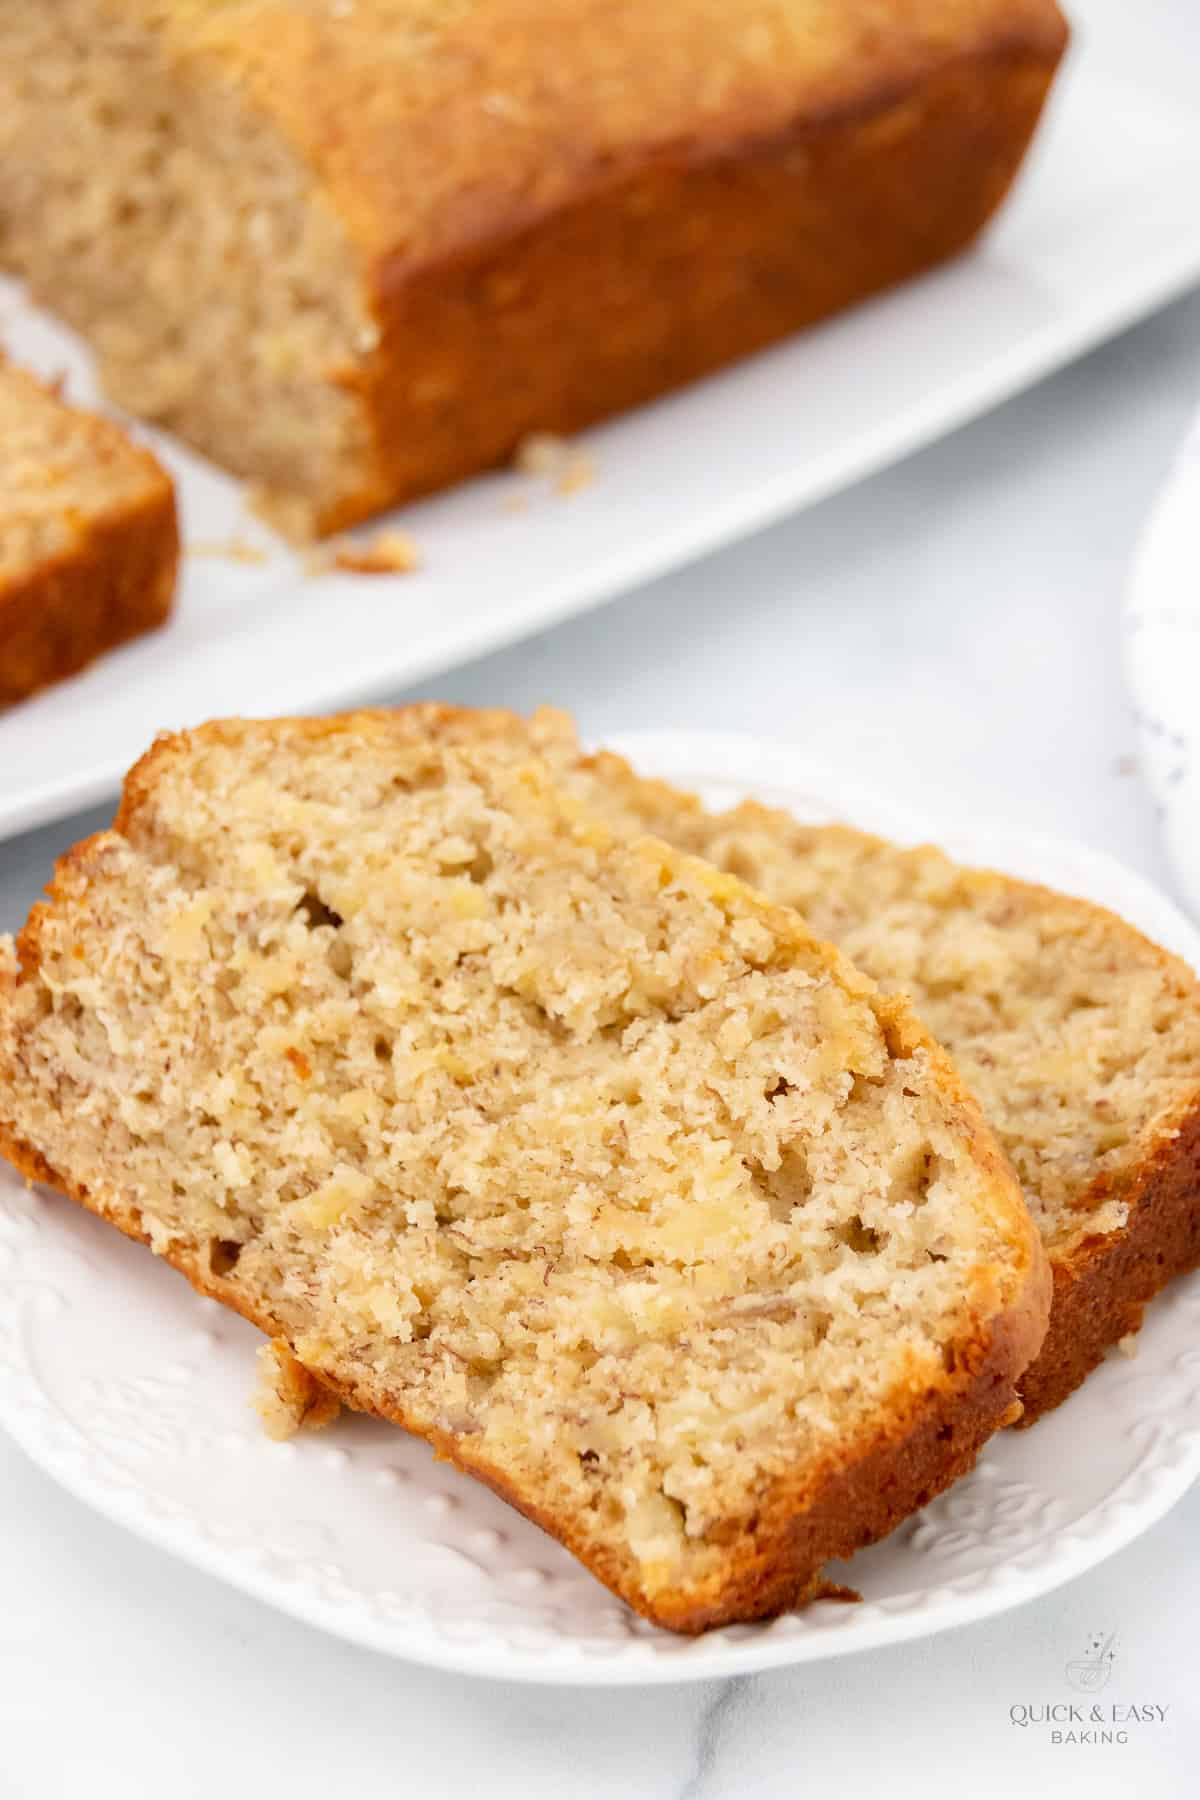 Close up view of sliced banana bread on a white plate.